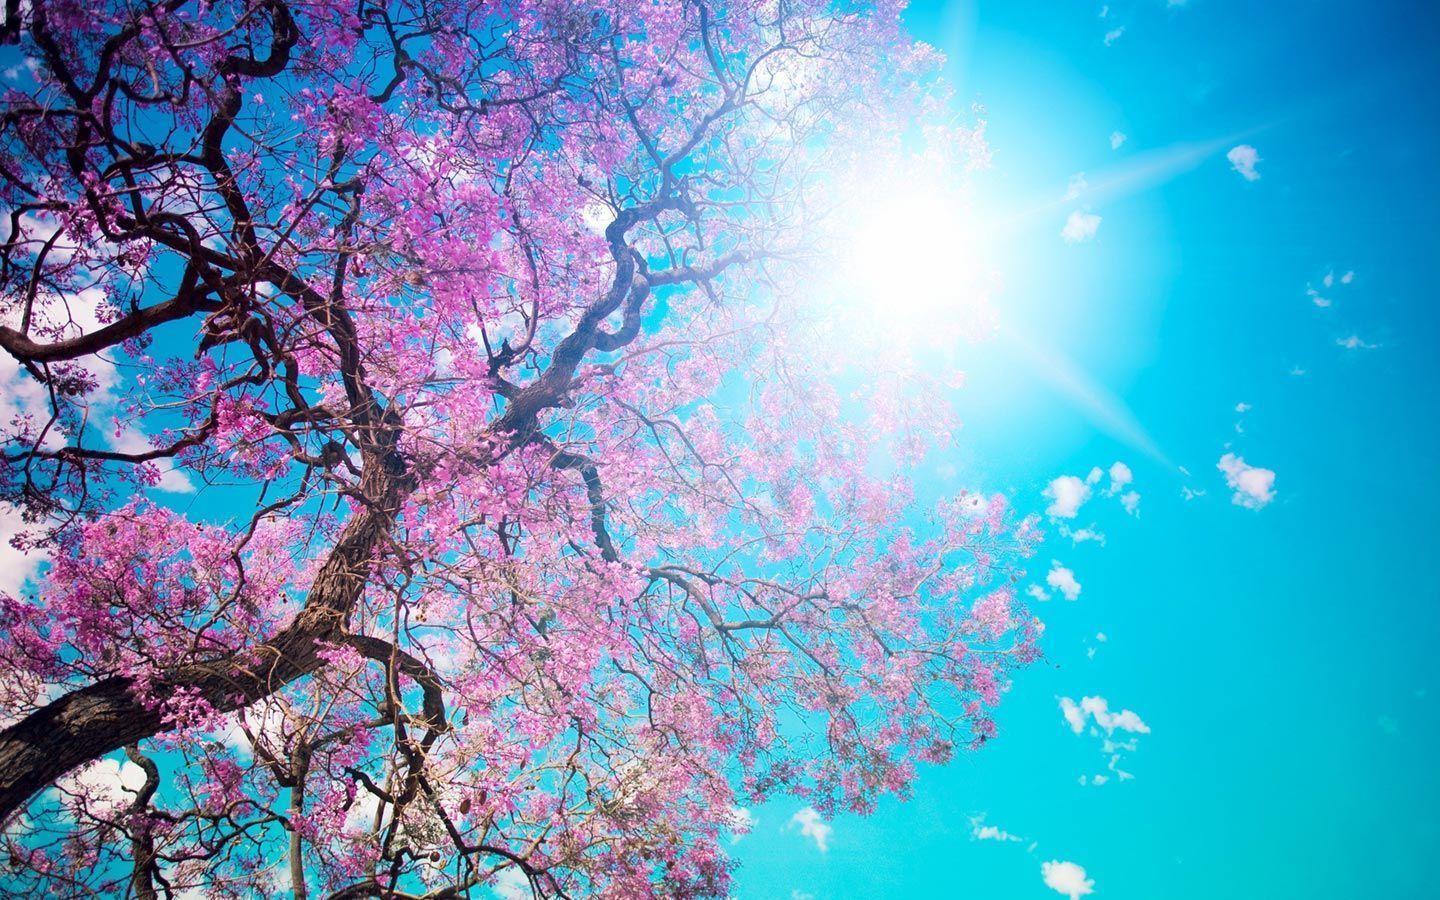 Spring Background 5 amazing background 21857 HD Wallpaper